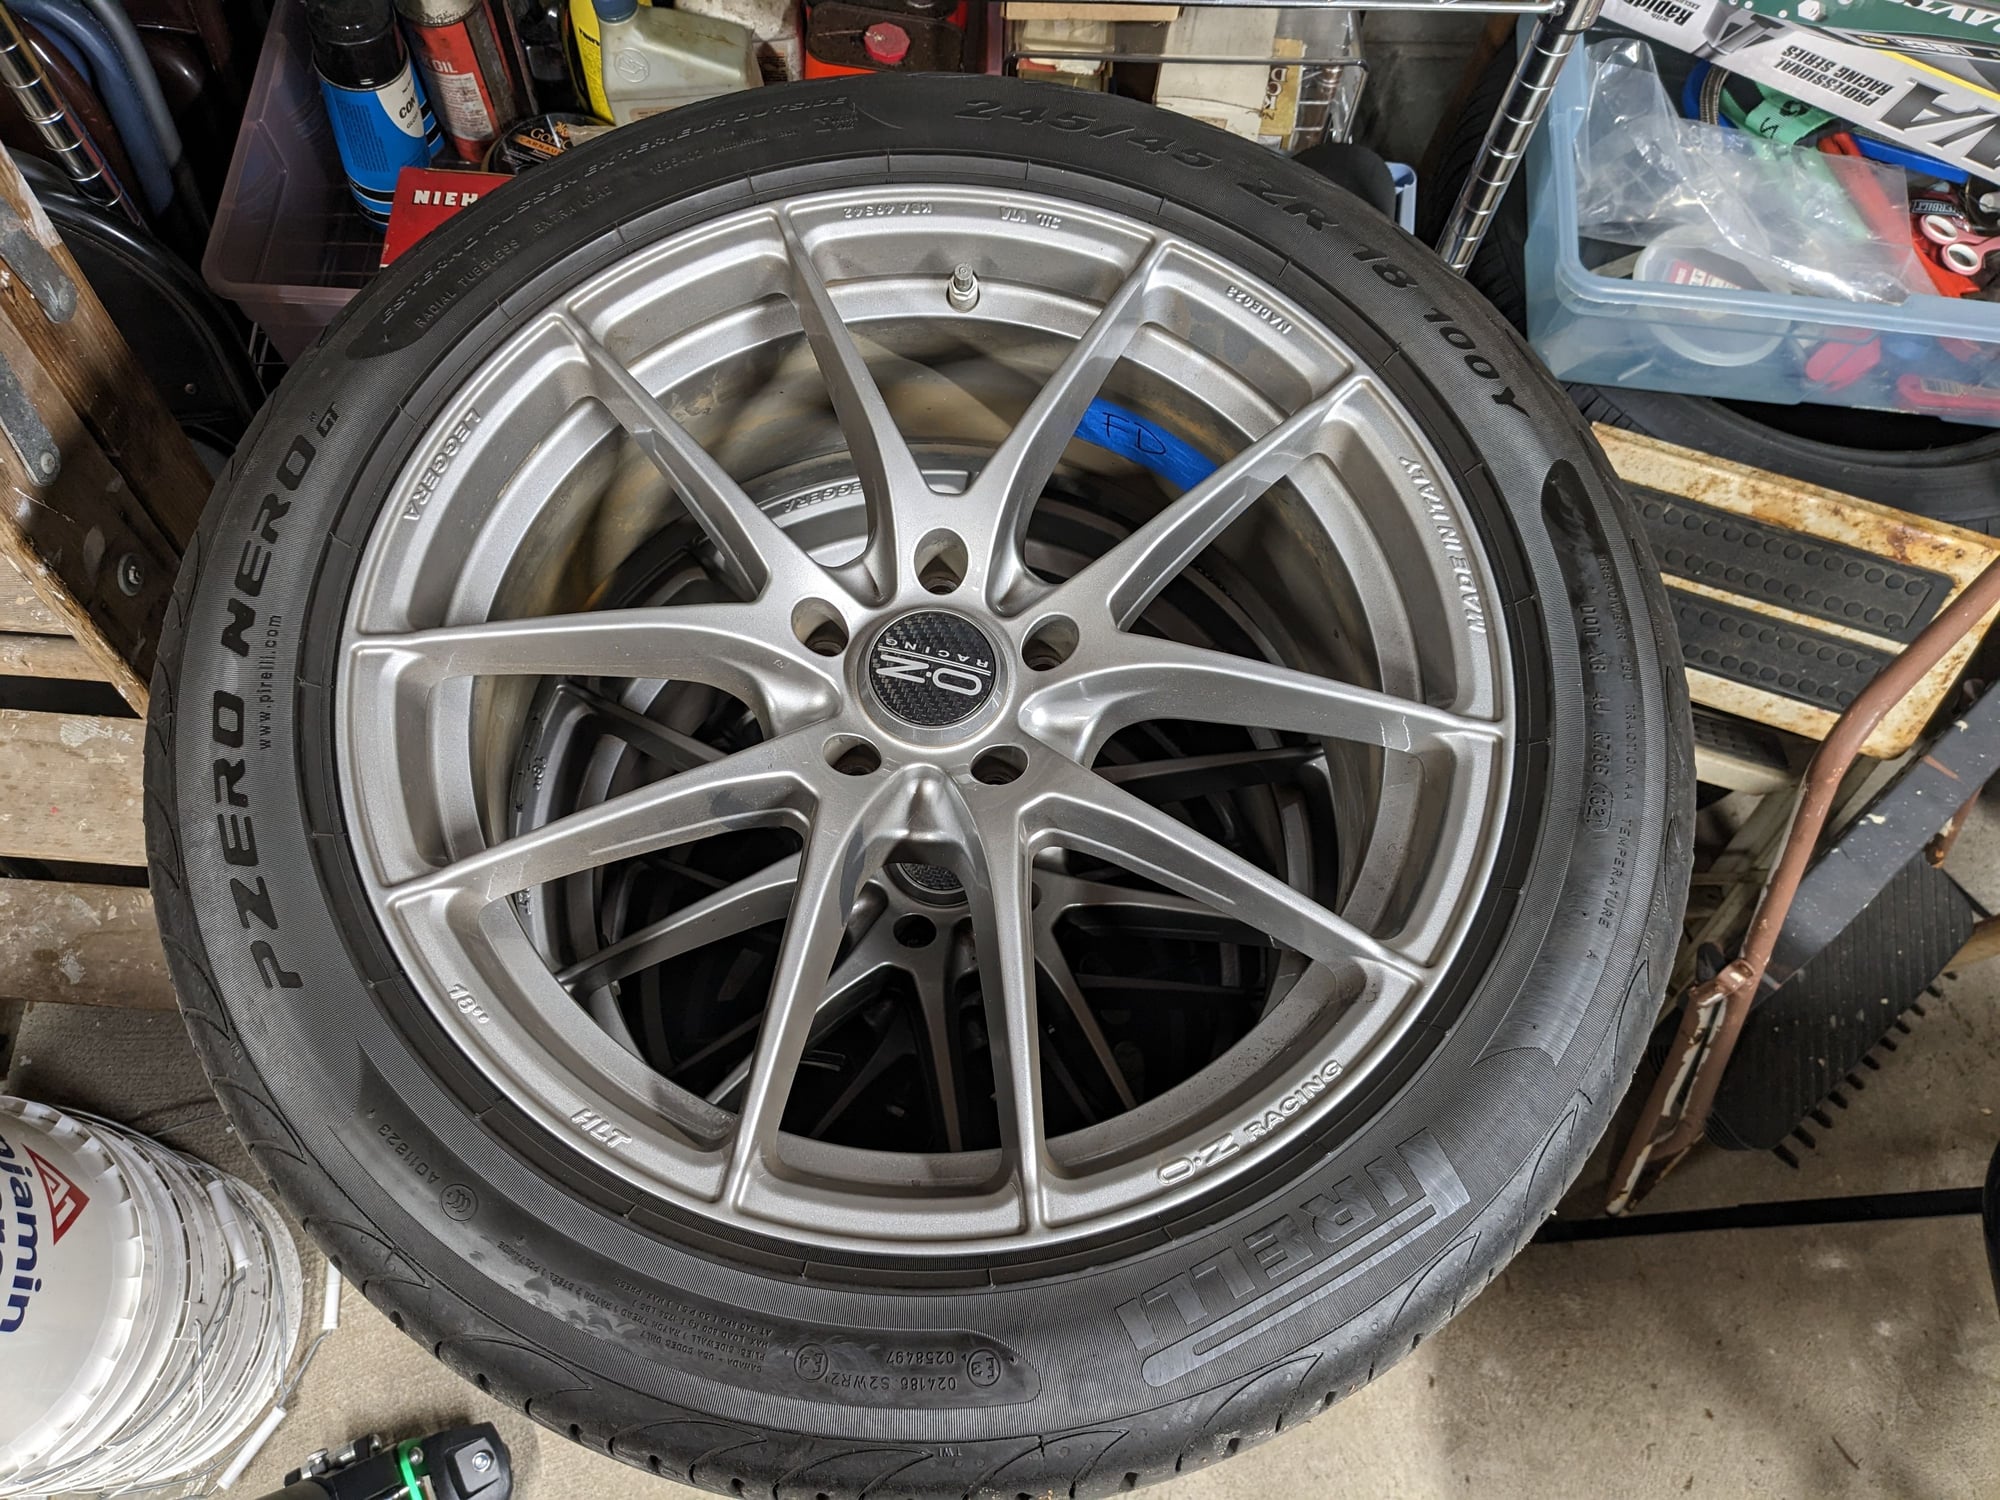 Wheels and Tires/Axles - O.Z. wheels and Pirelli summer tires - Used - 2003 to 2023 Jaguar All Models - Flushing, NY 11355, United States